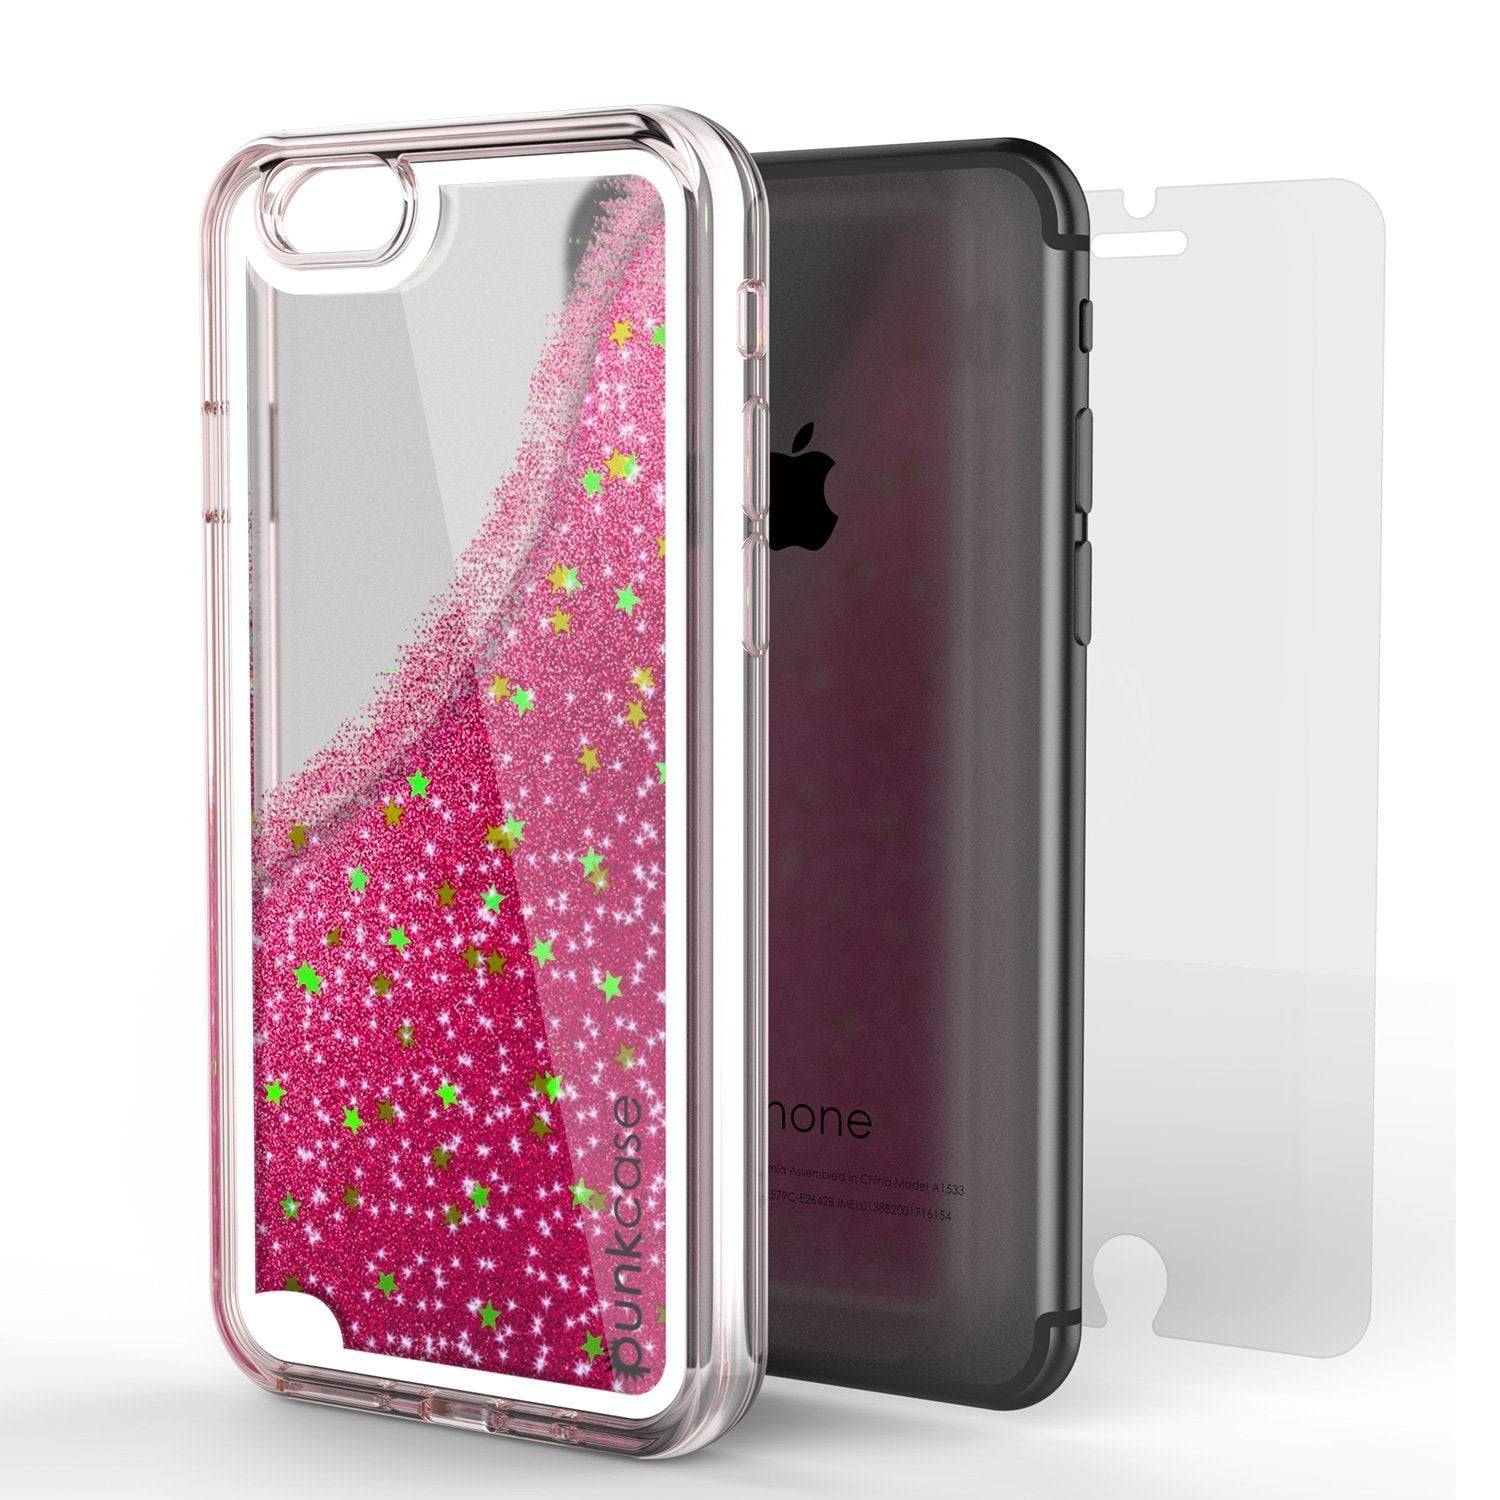 iPhone 8 Case, PunkCase LIQUID Pink Series, Protective Dual Layer Floating Glitter Cover - PunkCase NZ